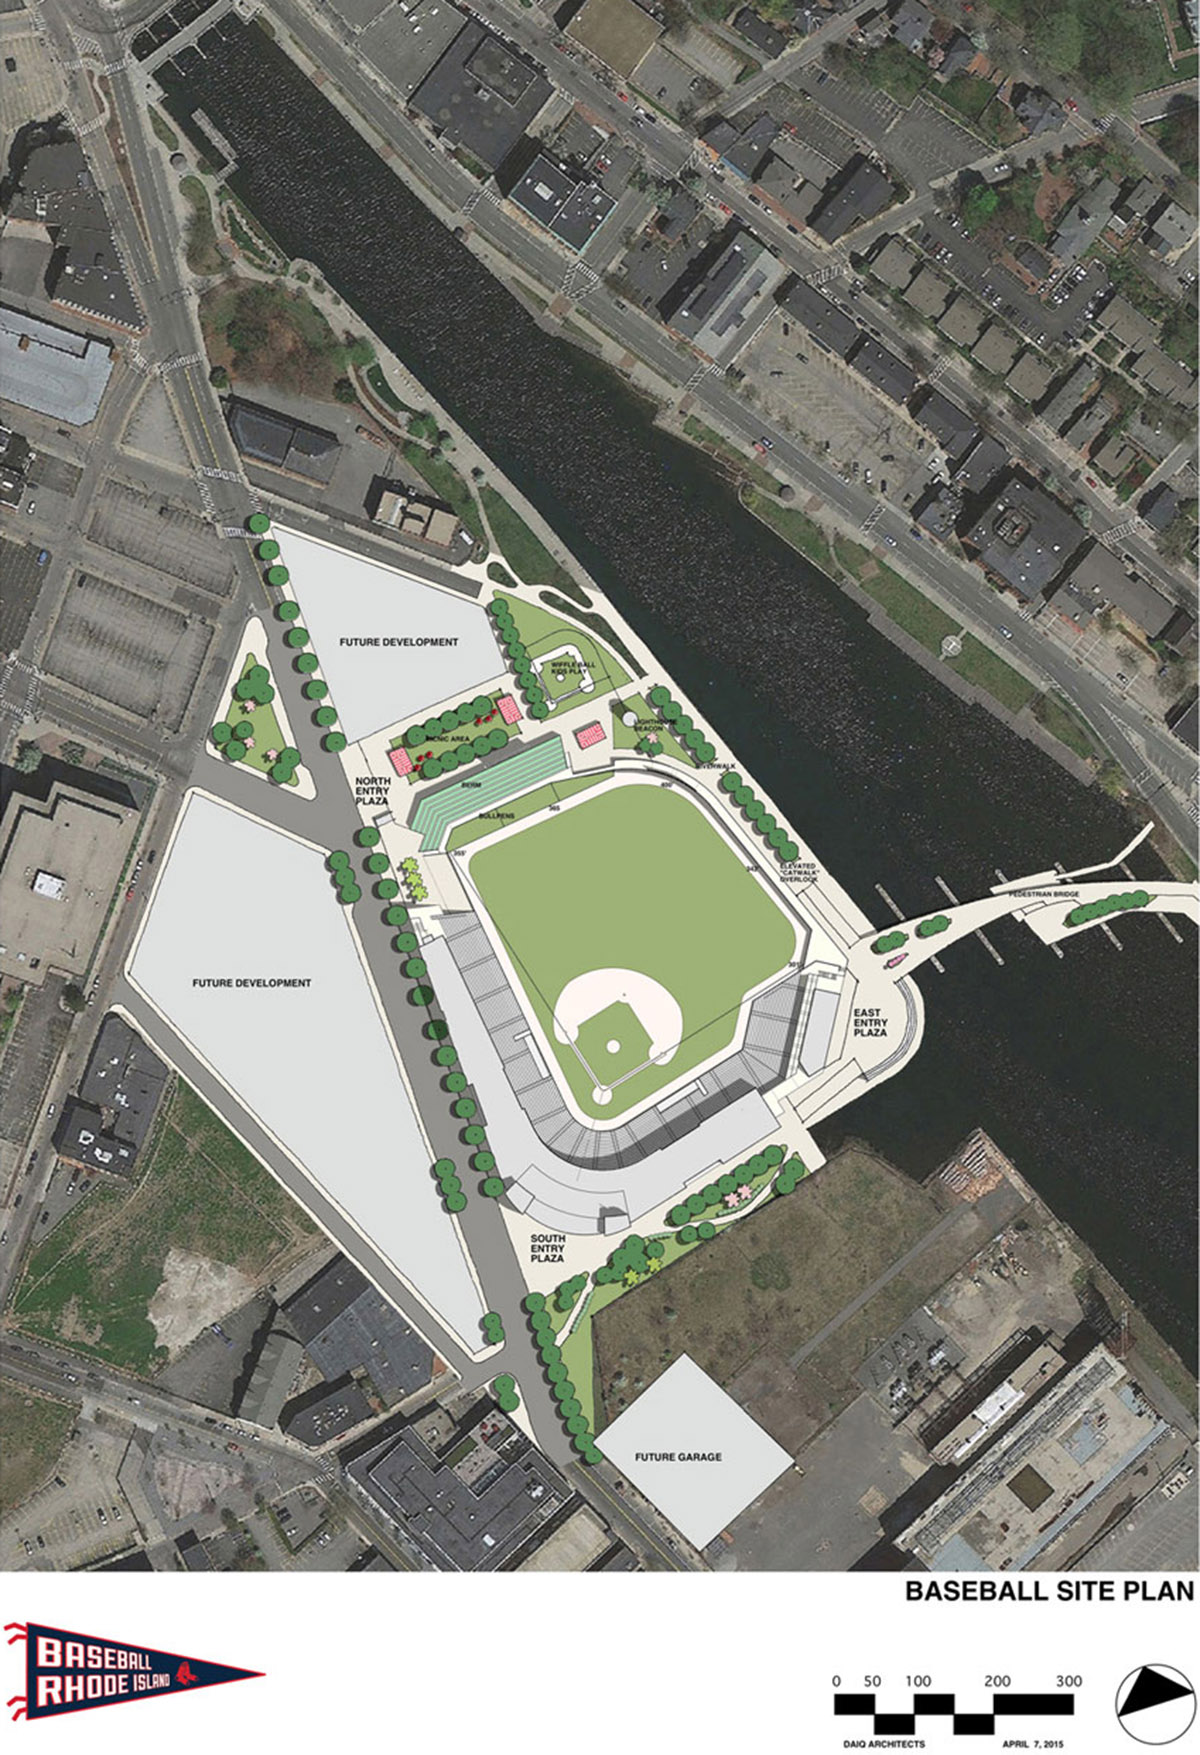 Could Fall River be the new home for the PawSox? Local officials